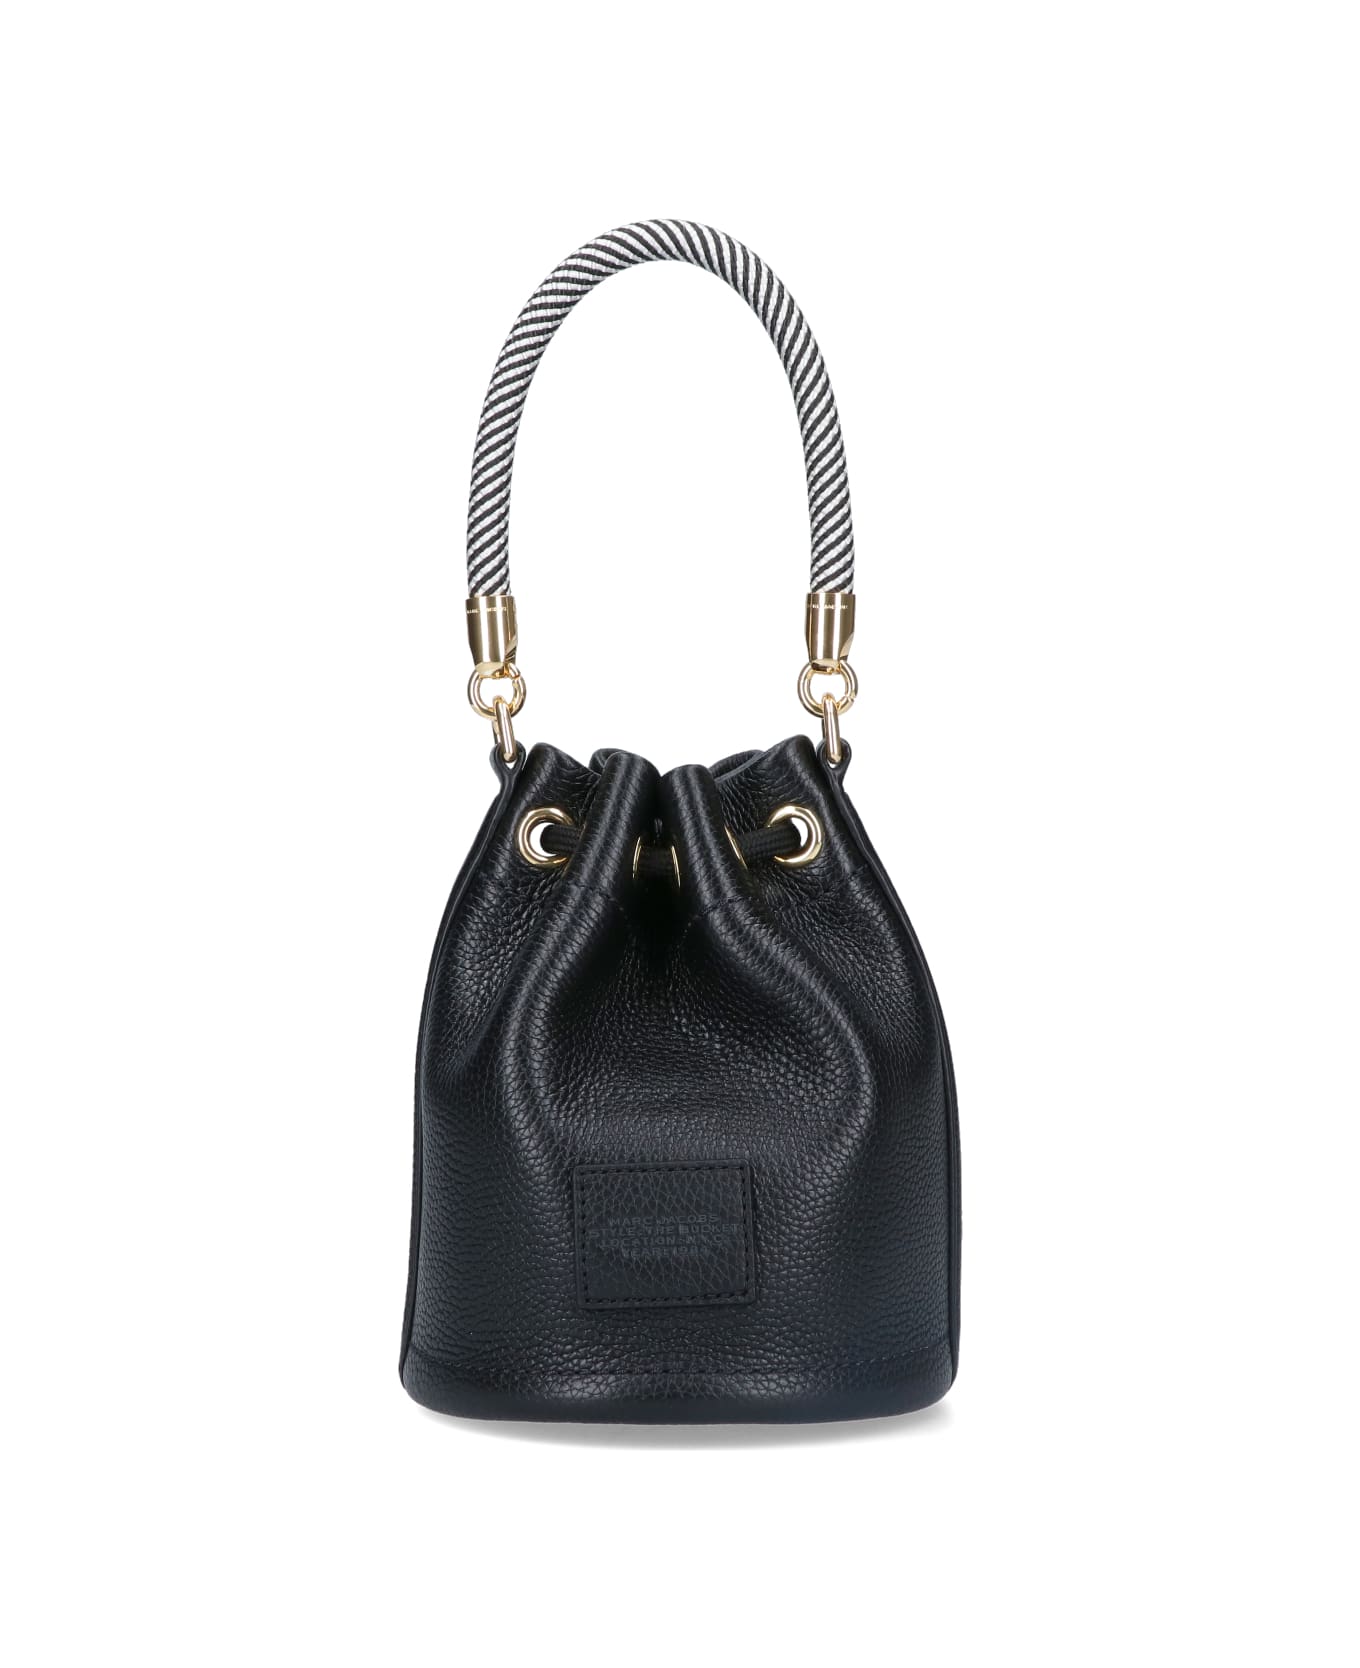 Marc Jacobs The Leather Bucket Bag - Black トートバッグ